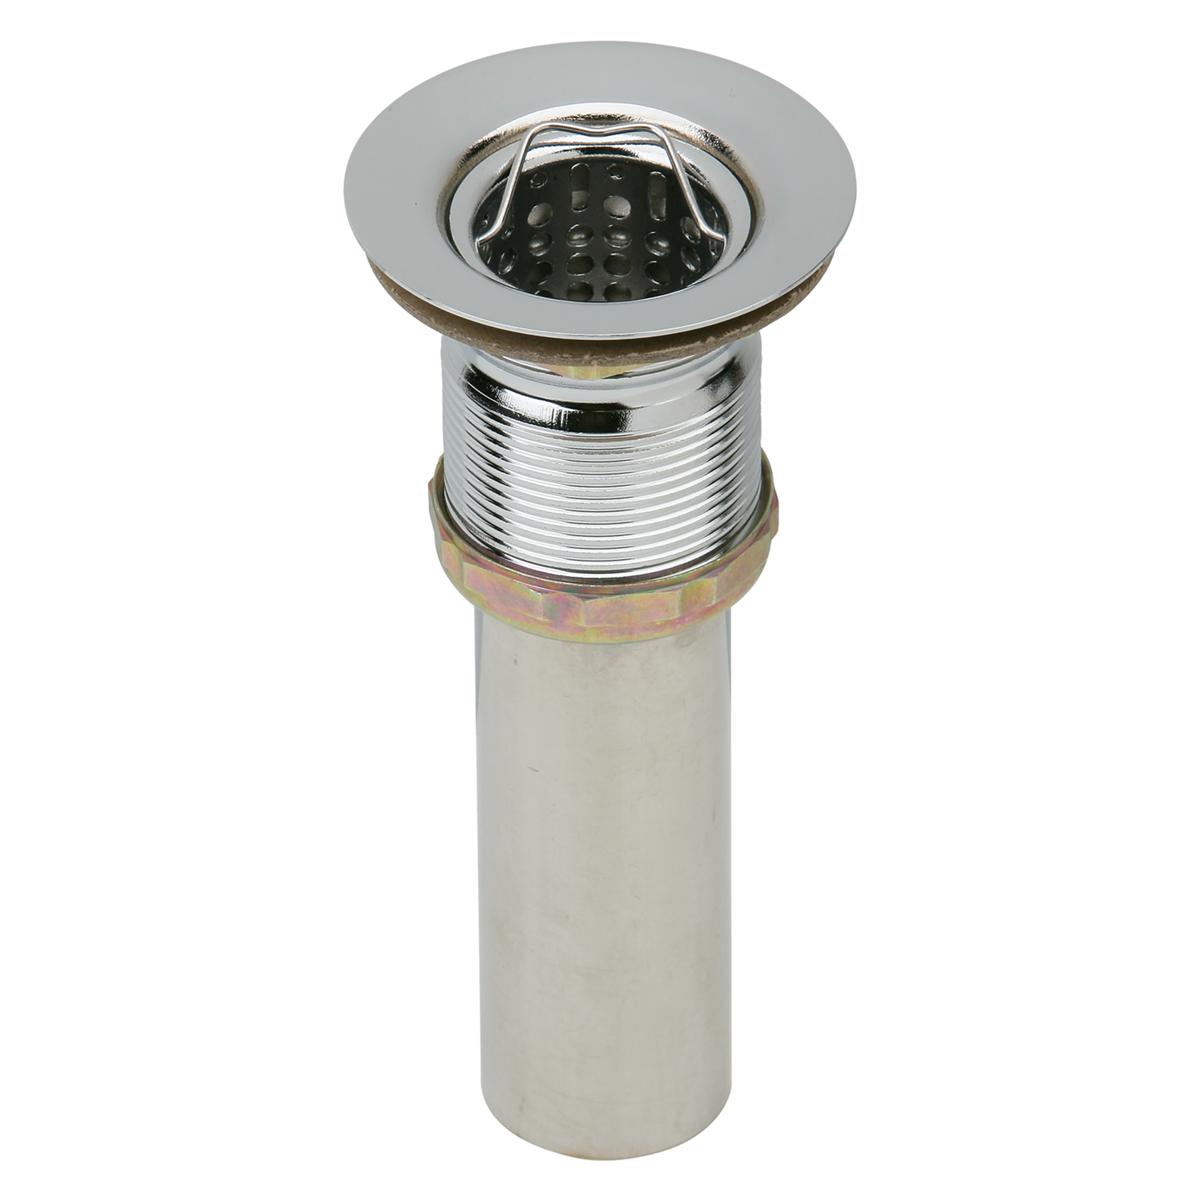 Elkay Drain Fitting 2" Nickel Plated Brass Body With Deep Stainless Steel Strainer Basket 1257428